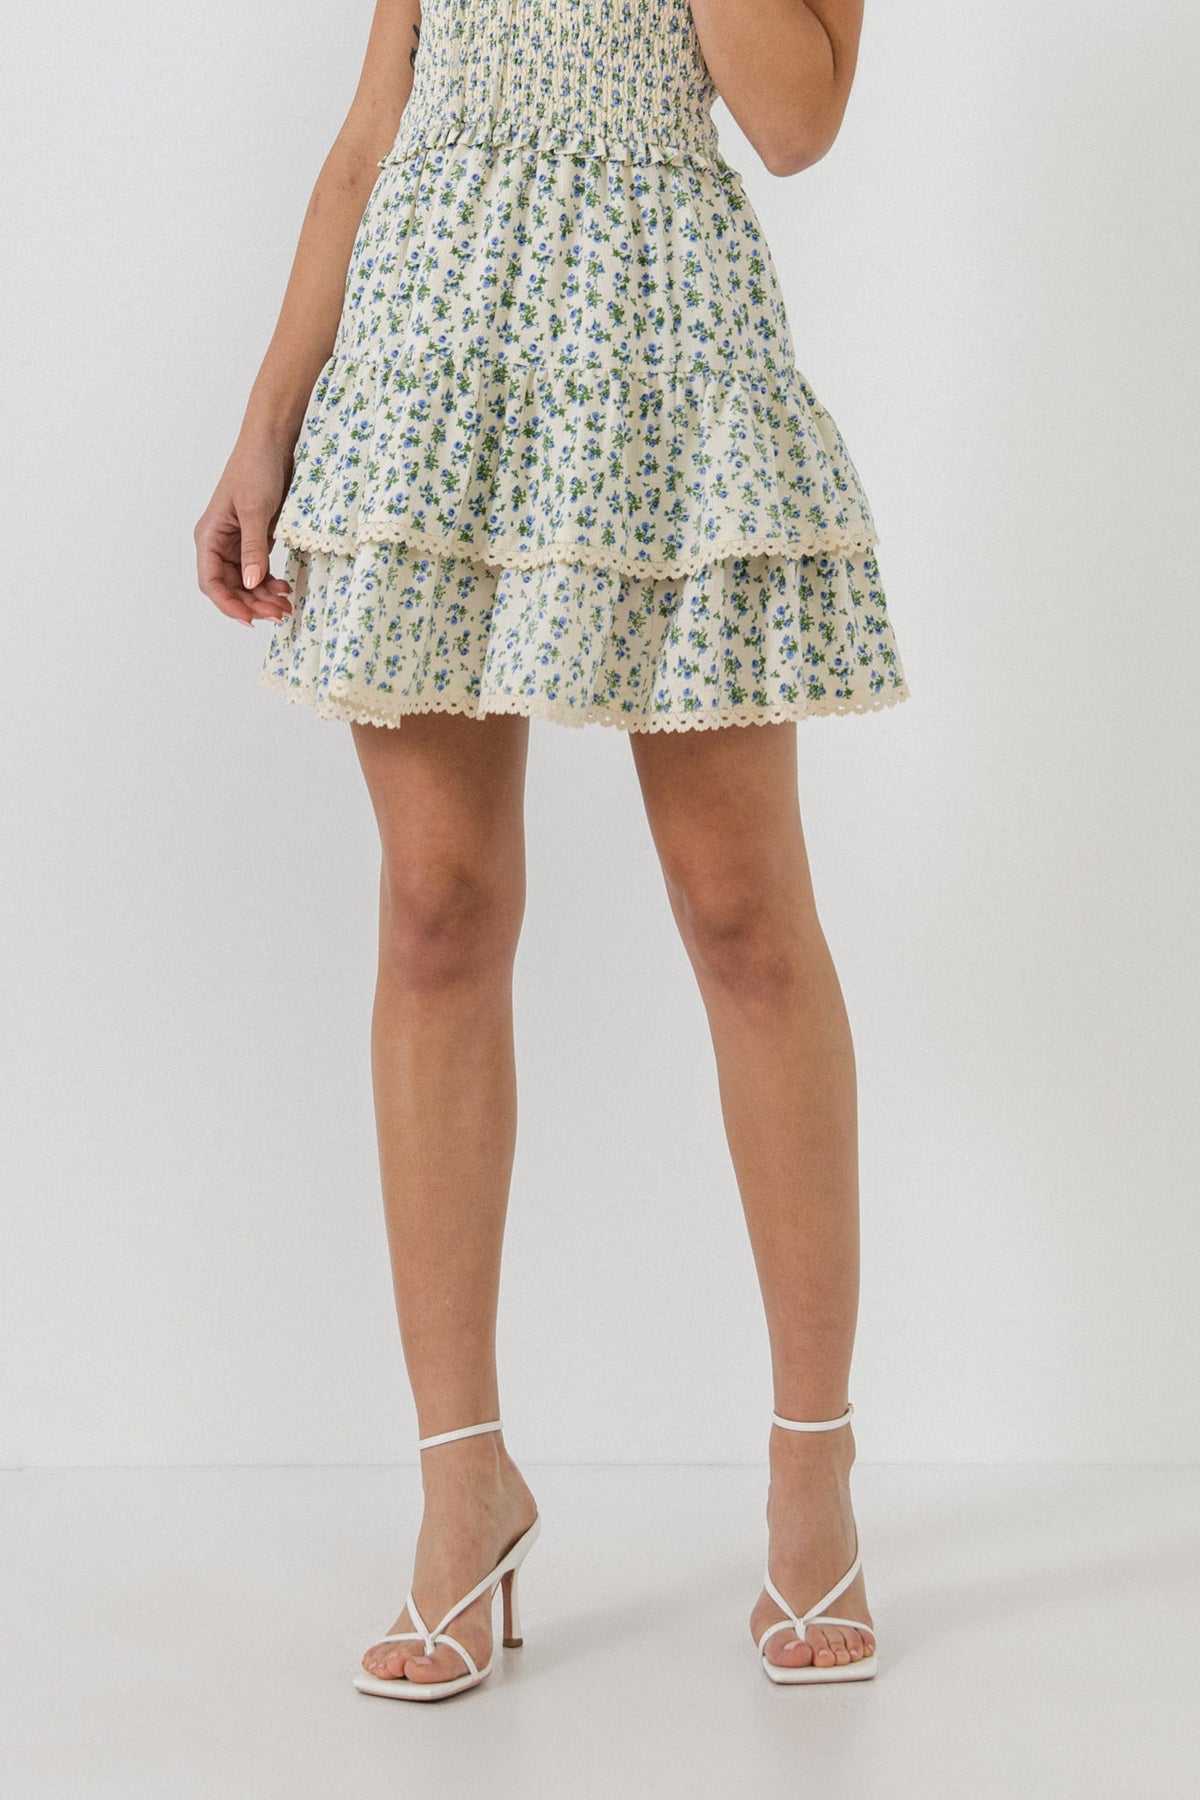 FREE THE ROSES - Floral Lace Trim Detail MIni Skirt - sale available at Objectrare